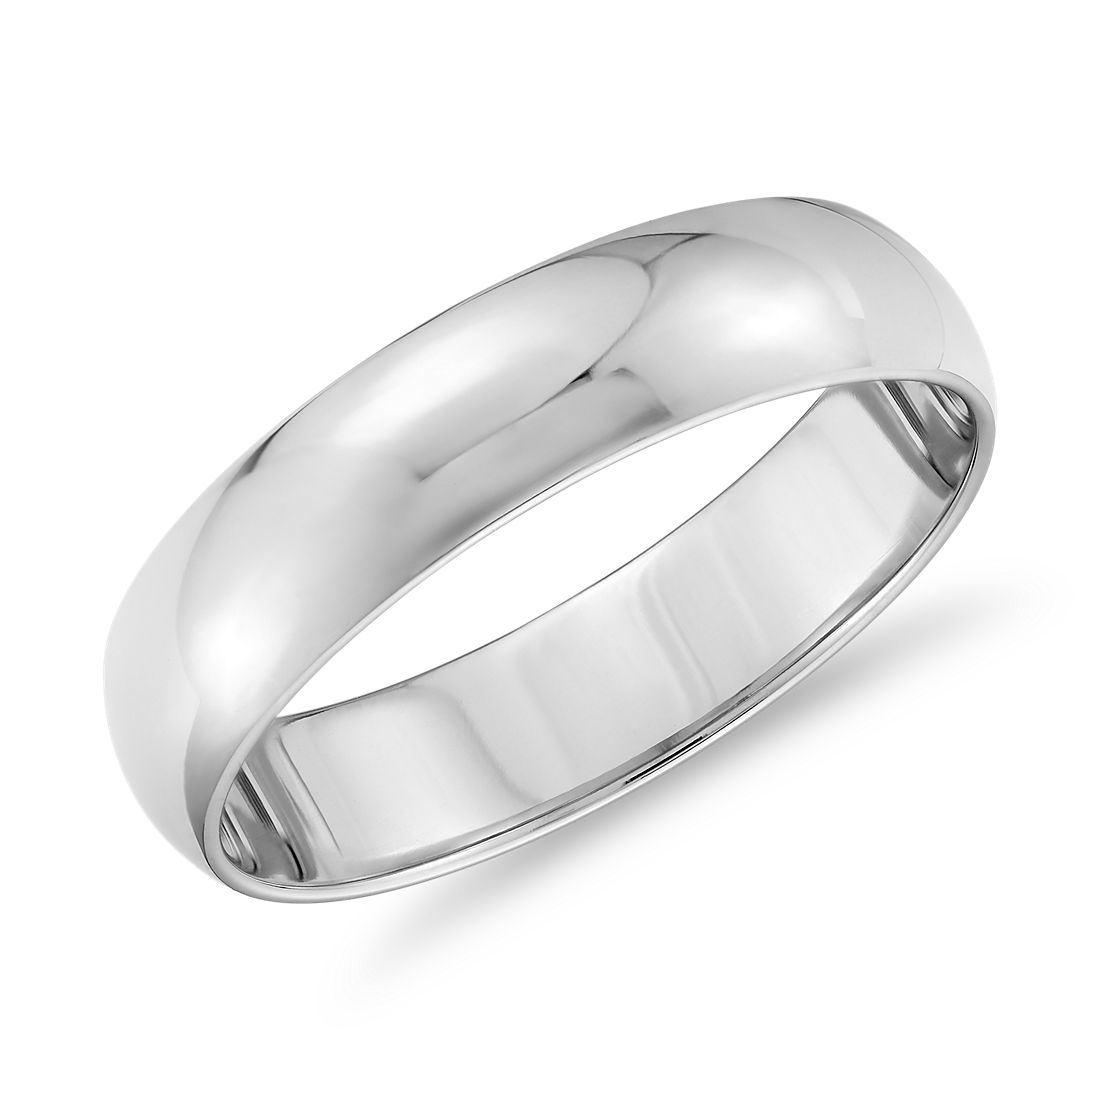 14K White Gold mens and womens plain wedding bands 5mm comfort-fit light